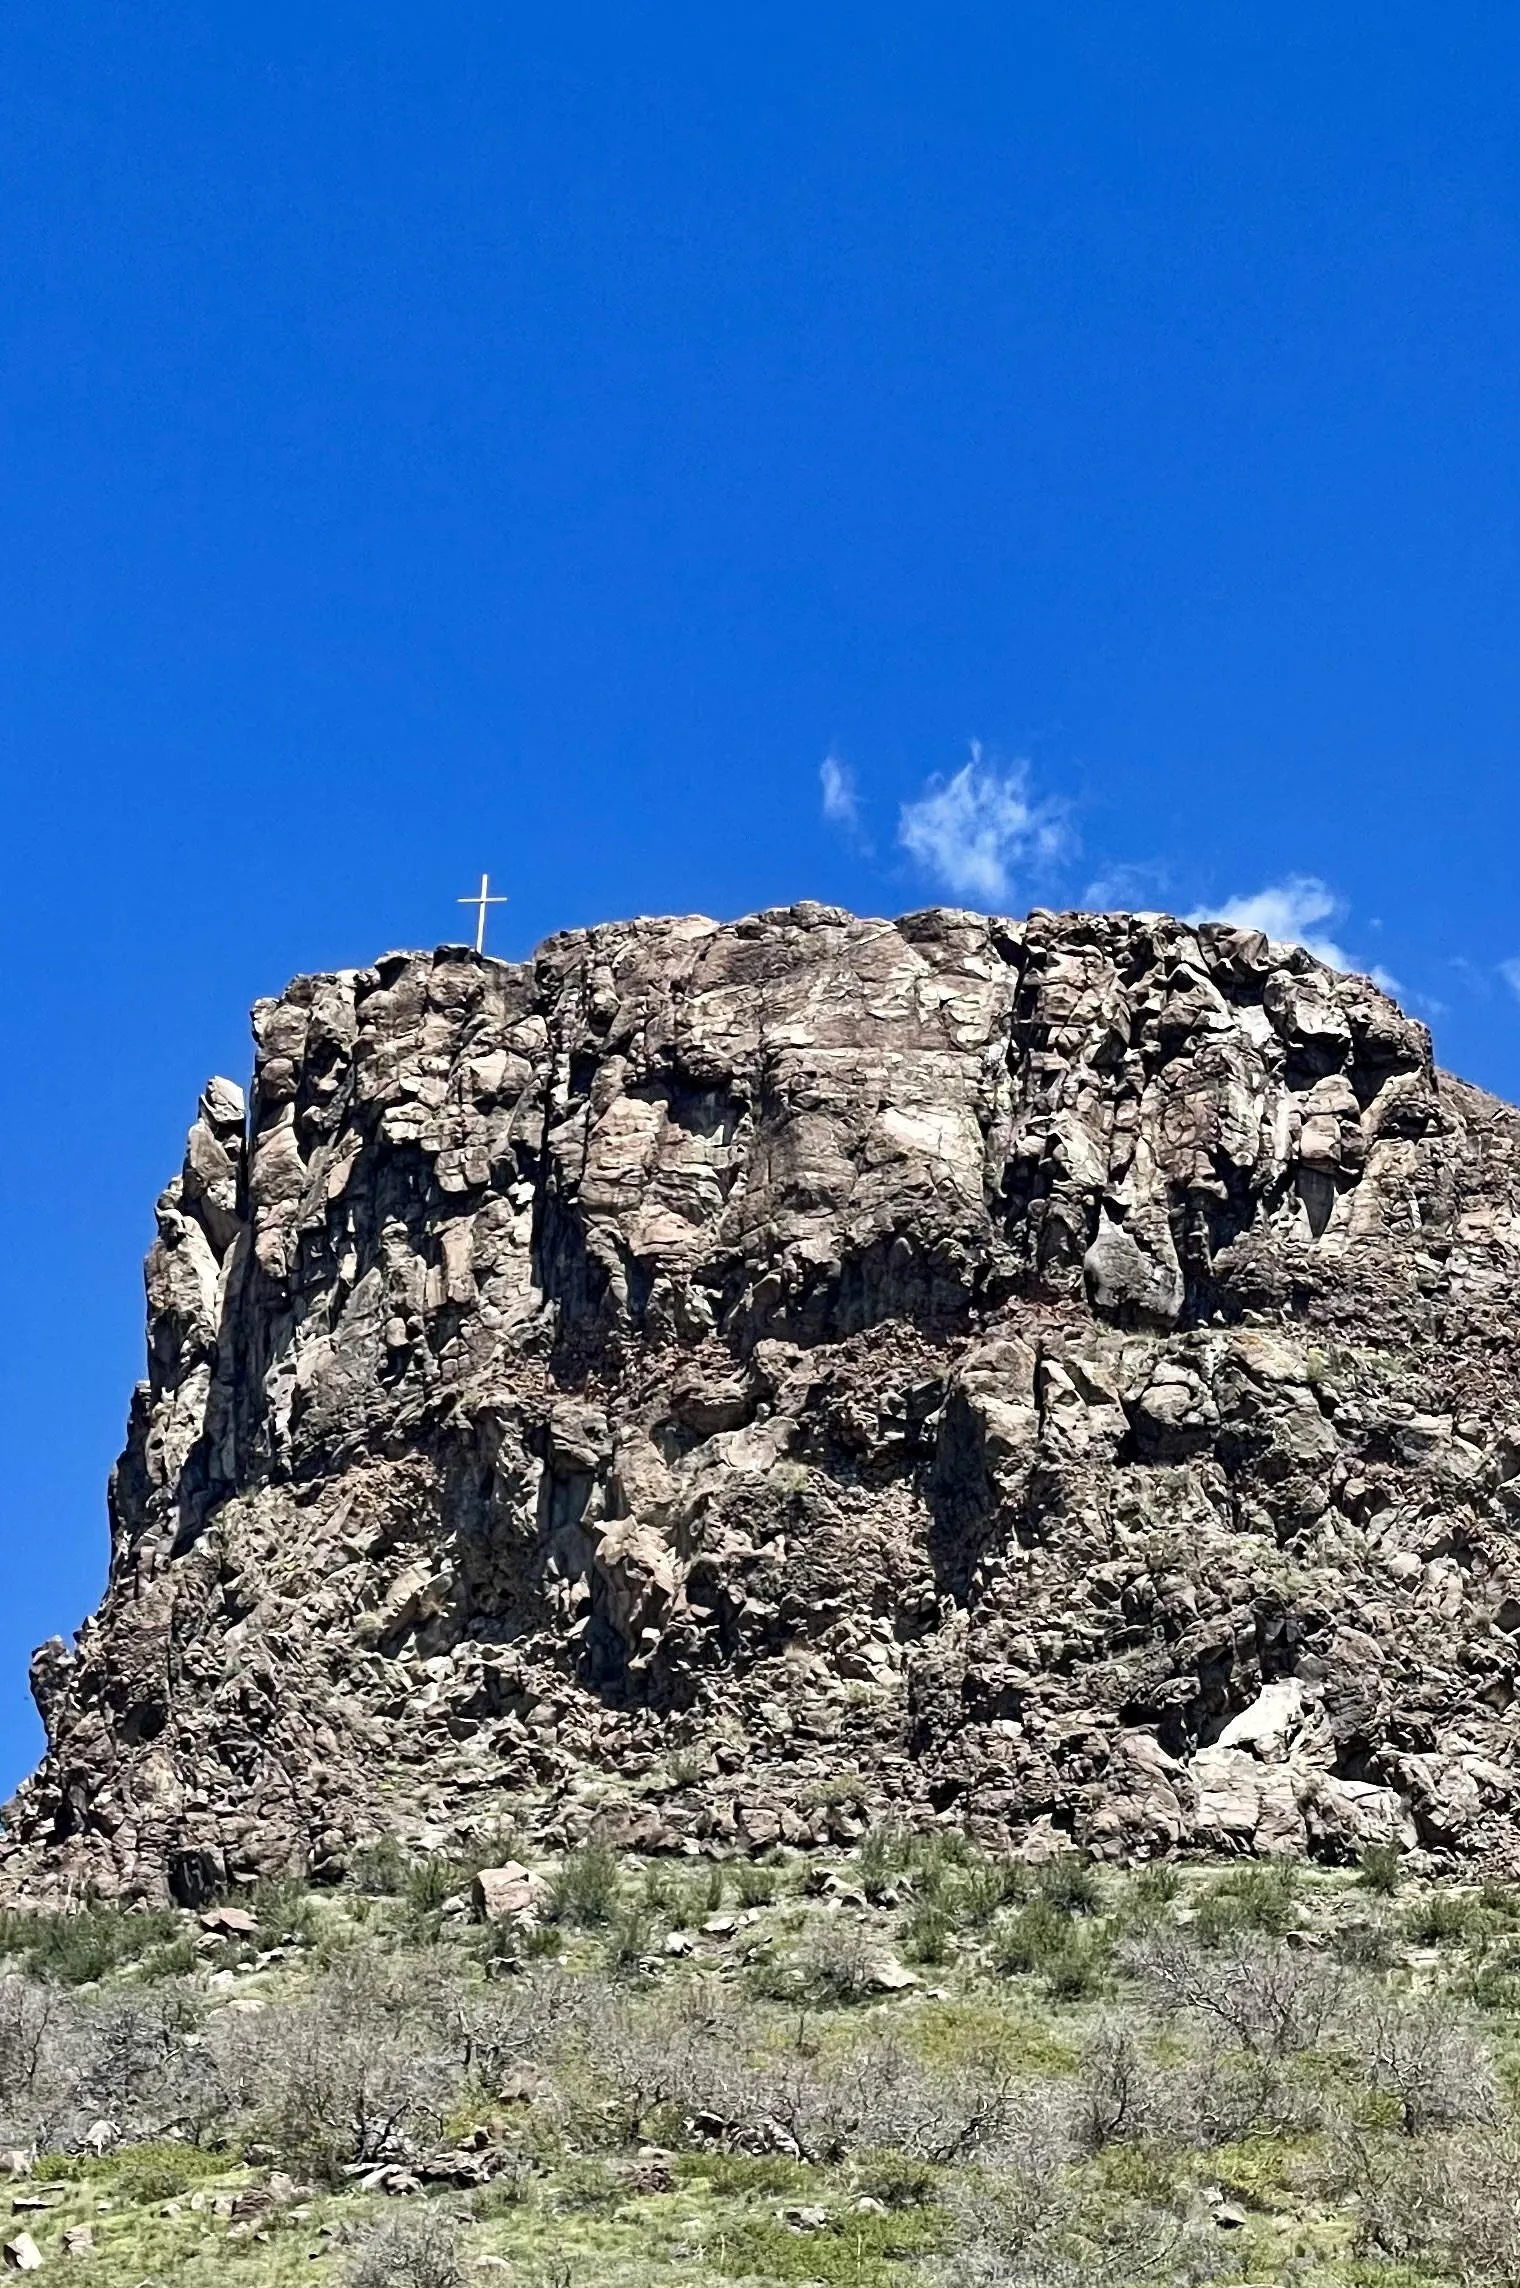 Castle Rock (a flat promotory  at the edge of South Table Mountain) with a cross planted near the edge